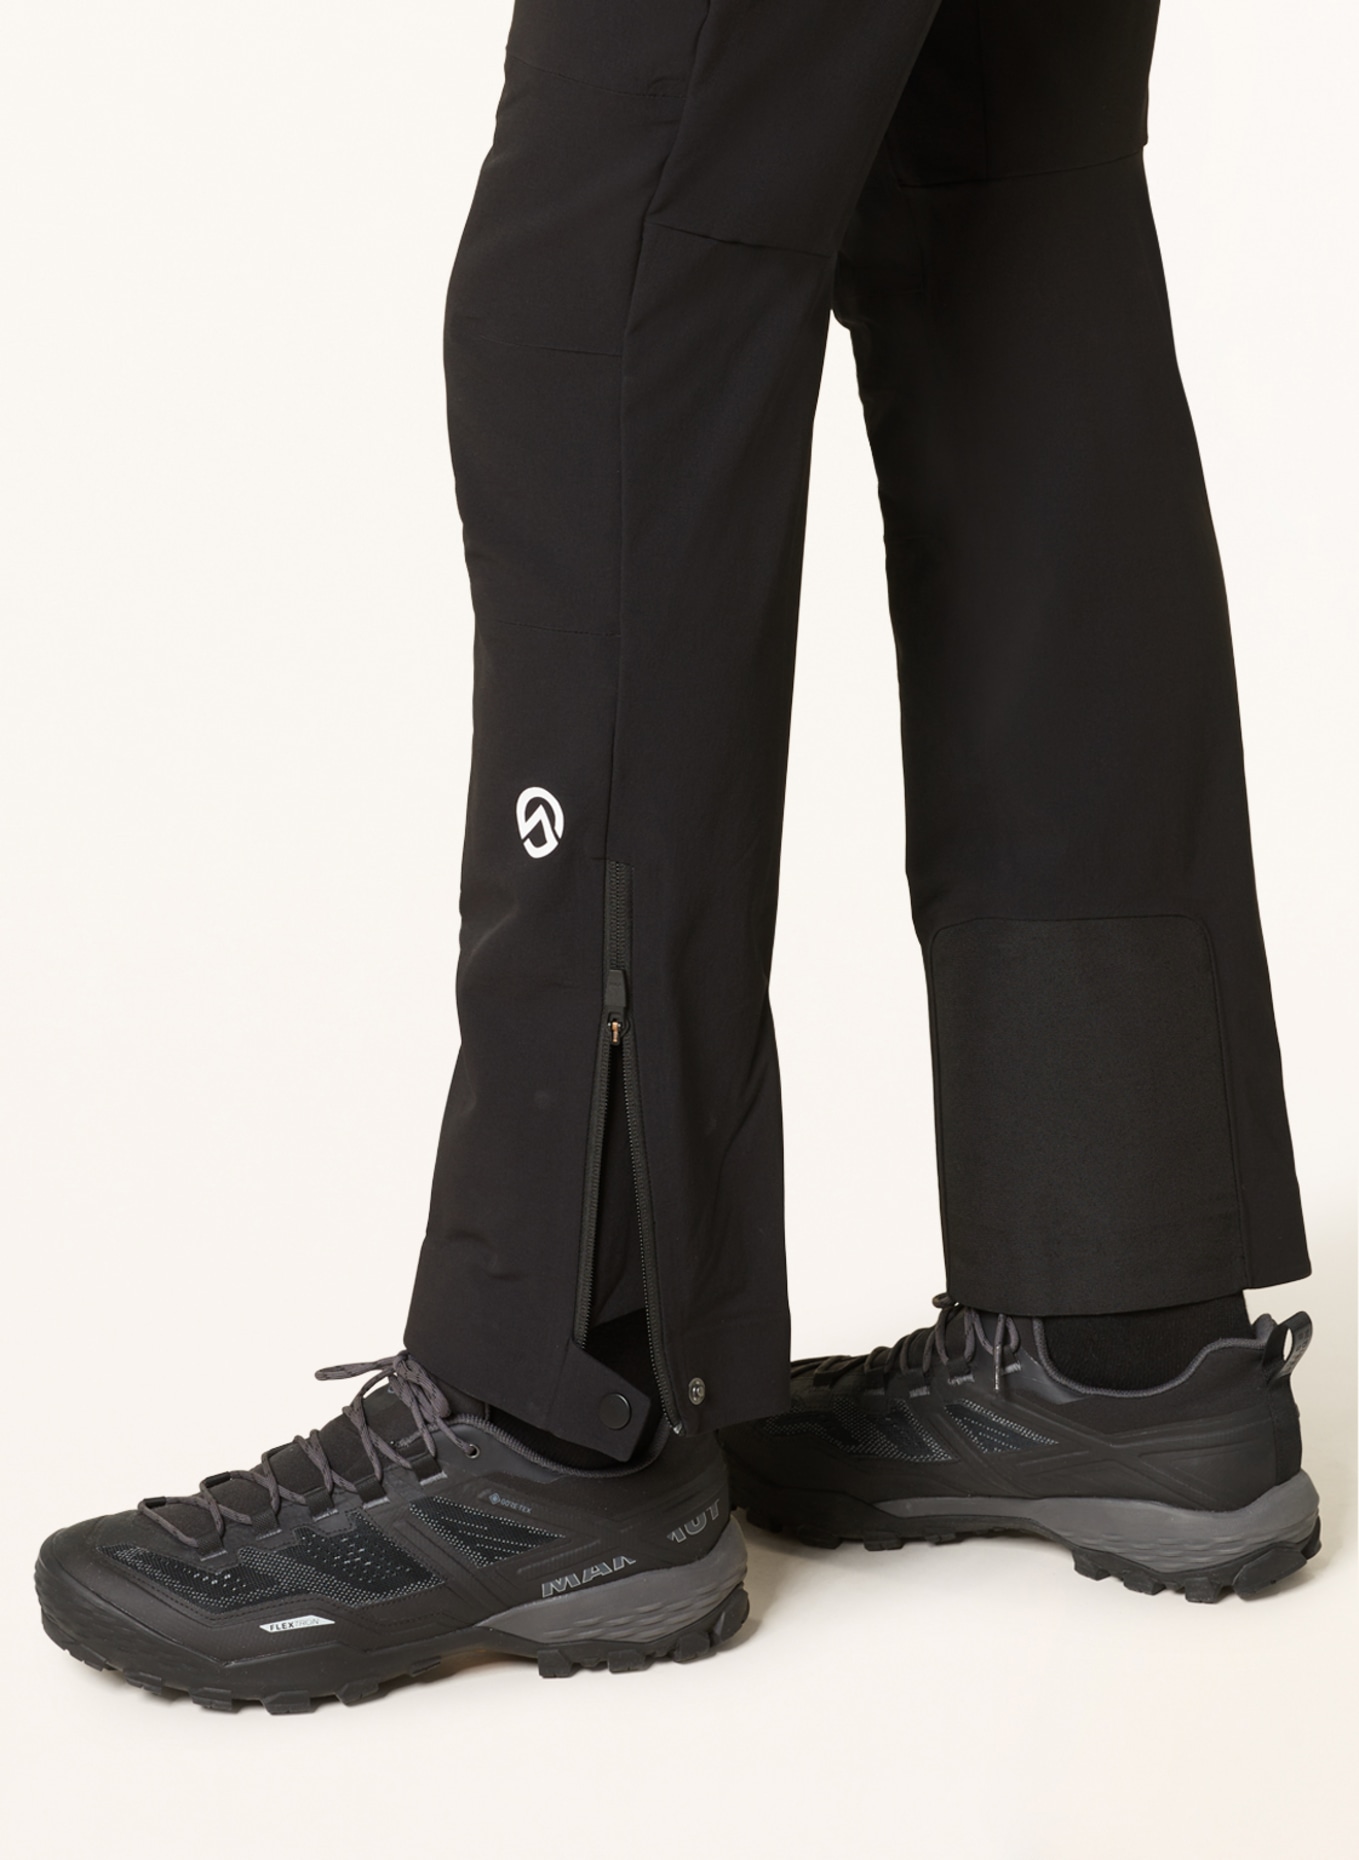 THE NORTH FACE Hiking pants MOUNTAIN ATHLETICS